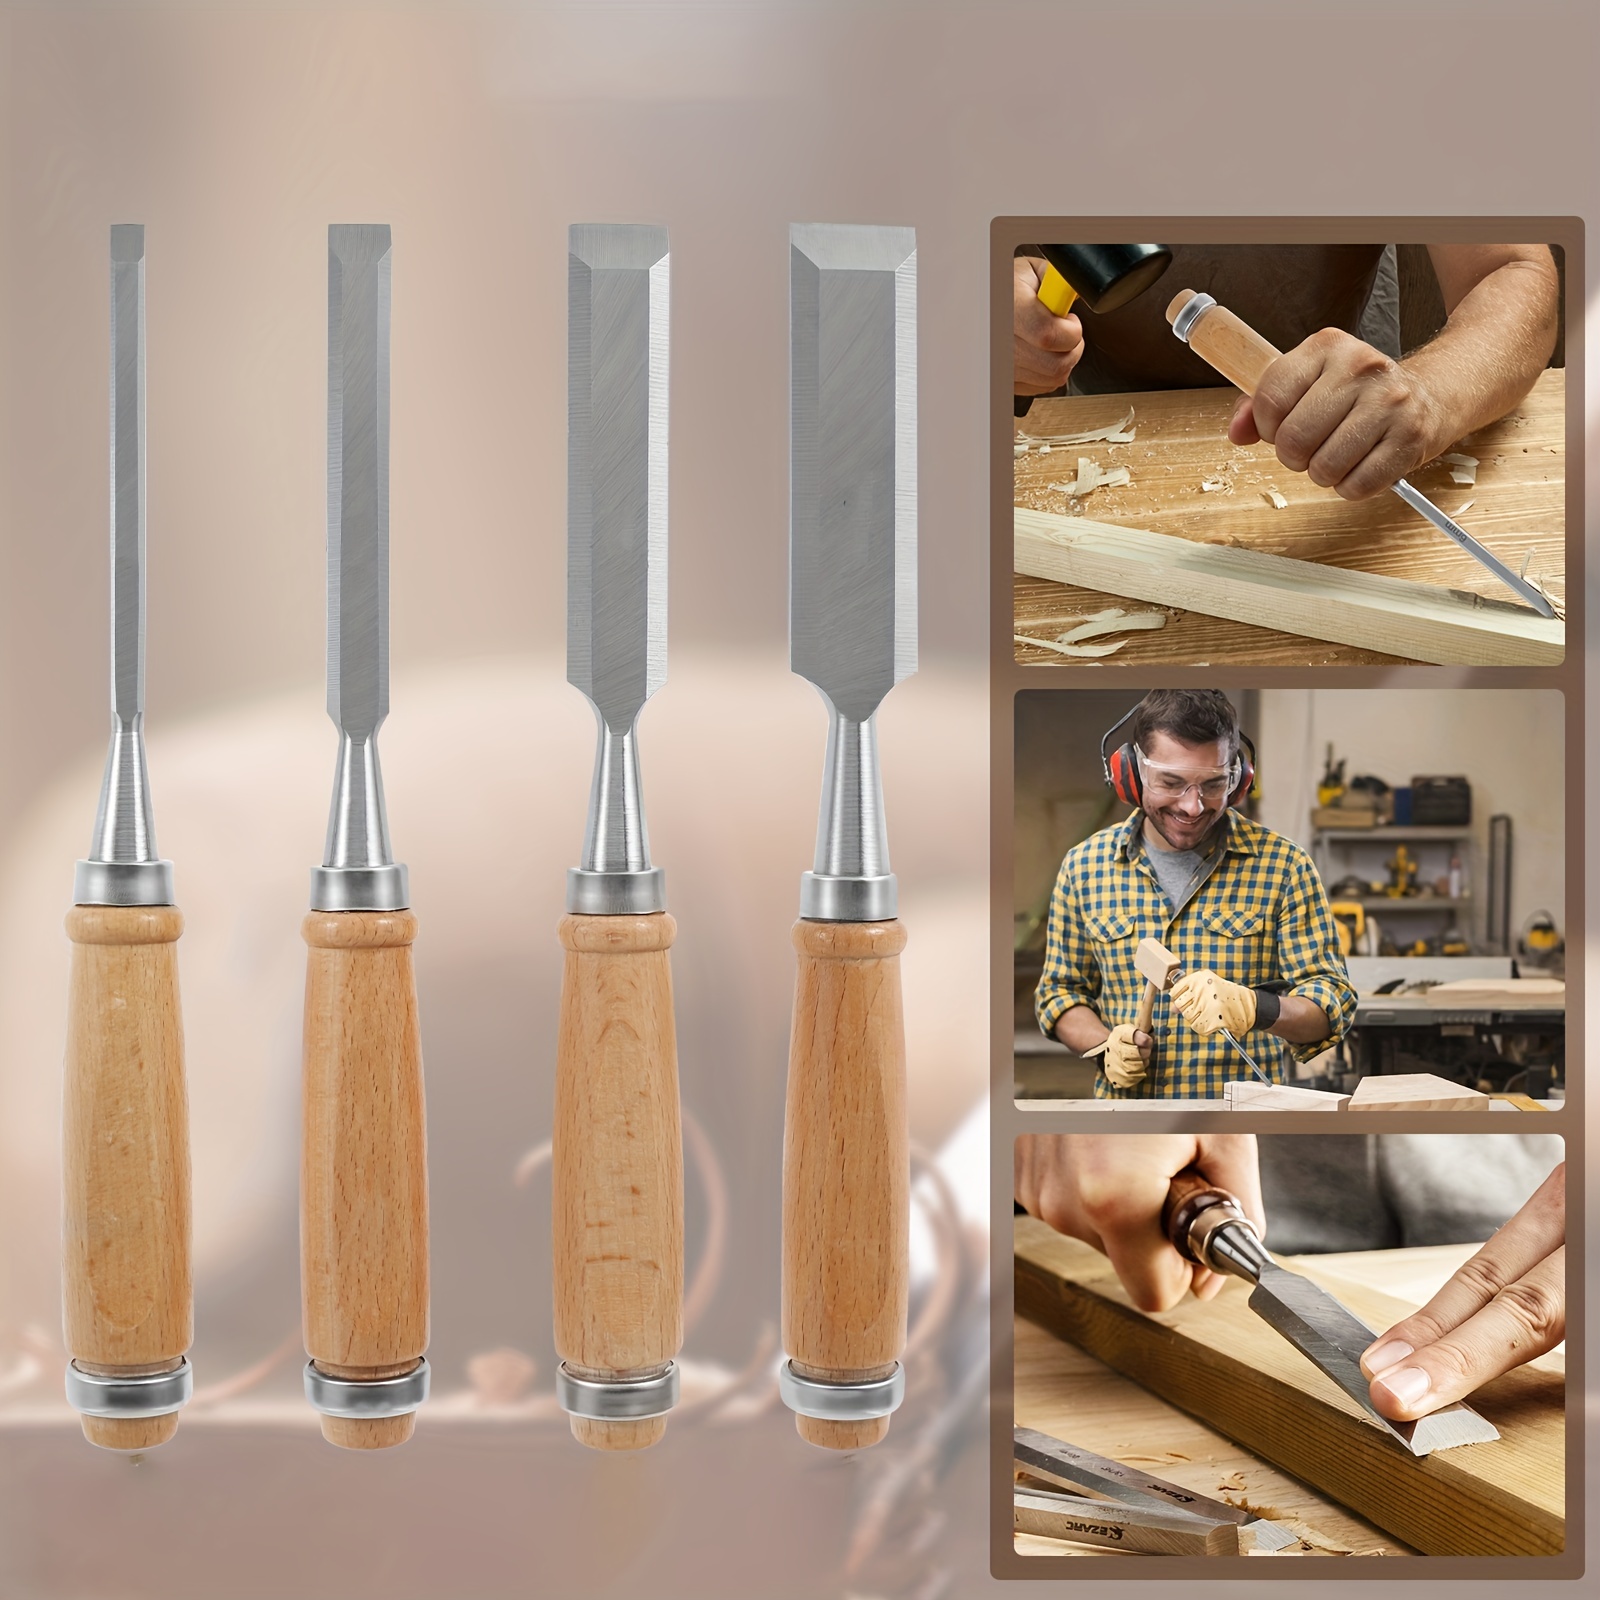 Wood Carving Chisel Set For Professional Results - Perfect For